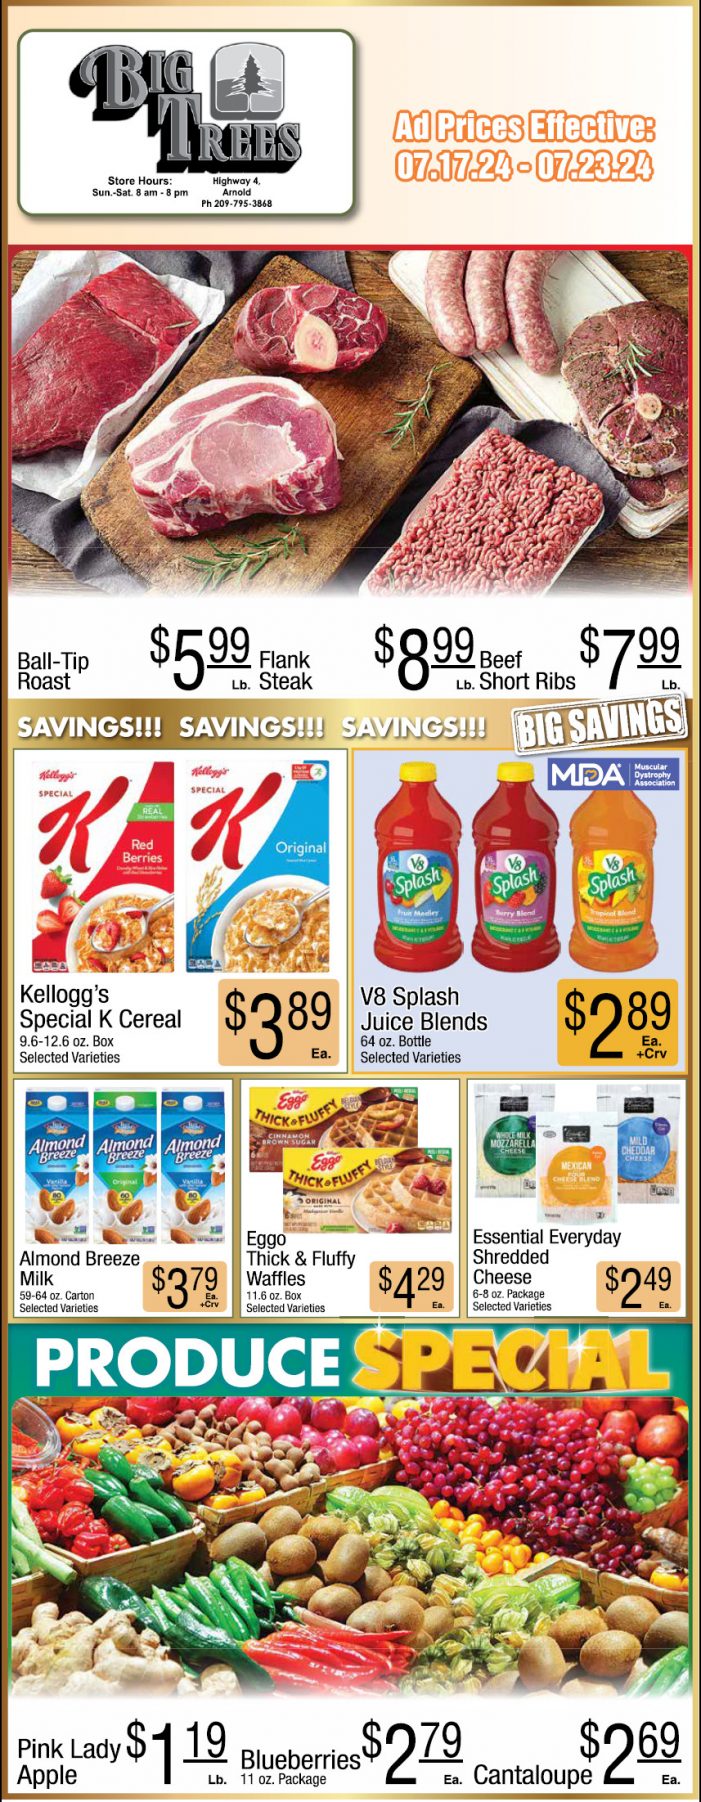 Big Trees Market Weekly Ad, Grocery, Produce, Meat & Deli Specials Through July 23rd! Shop Local & Save!